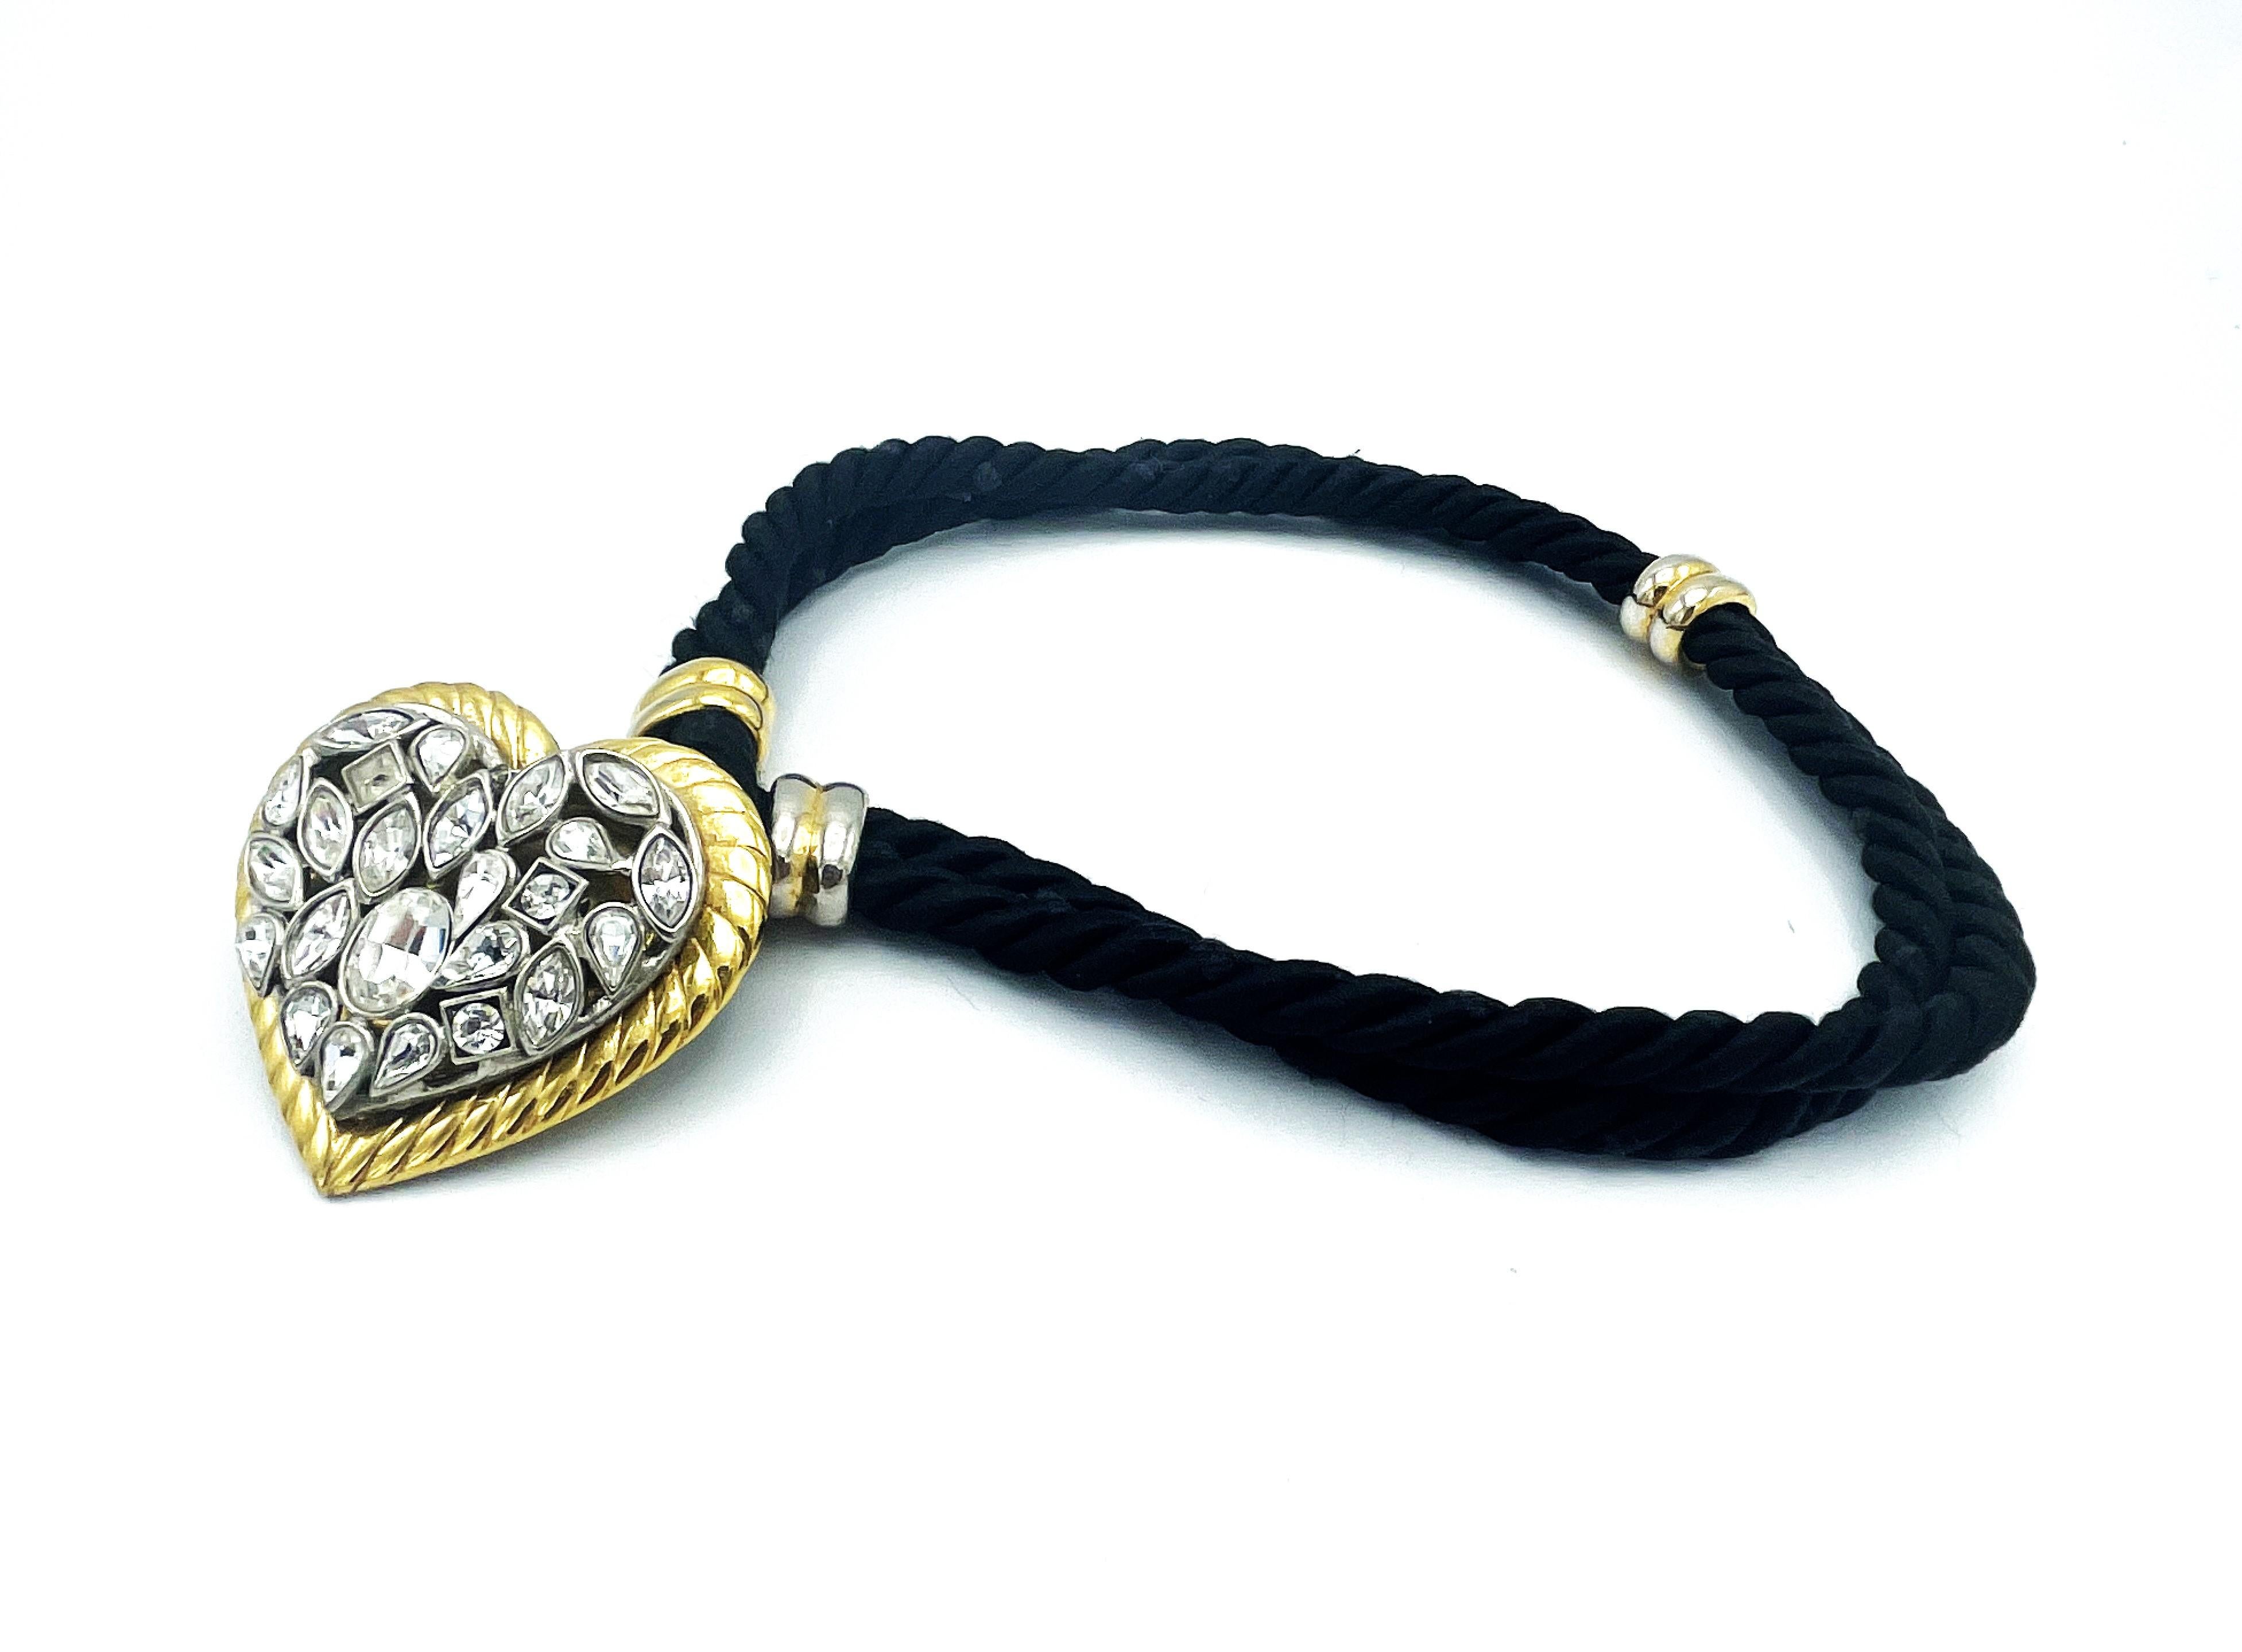 Very nice heart in gold with a cord edge. A silver heart is attached to it, which is filled with differently cut rhinestones. A double black cord is attached to the back of the heart and the chain can be worn short or long. A very rare decorative